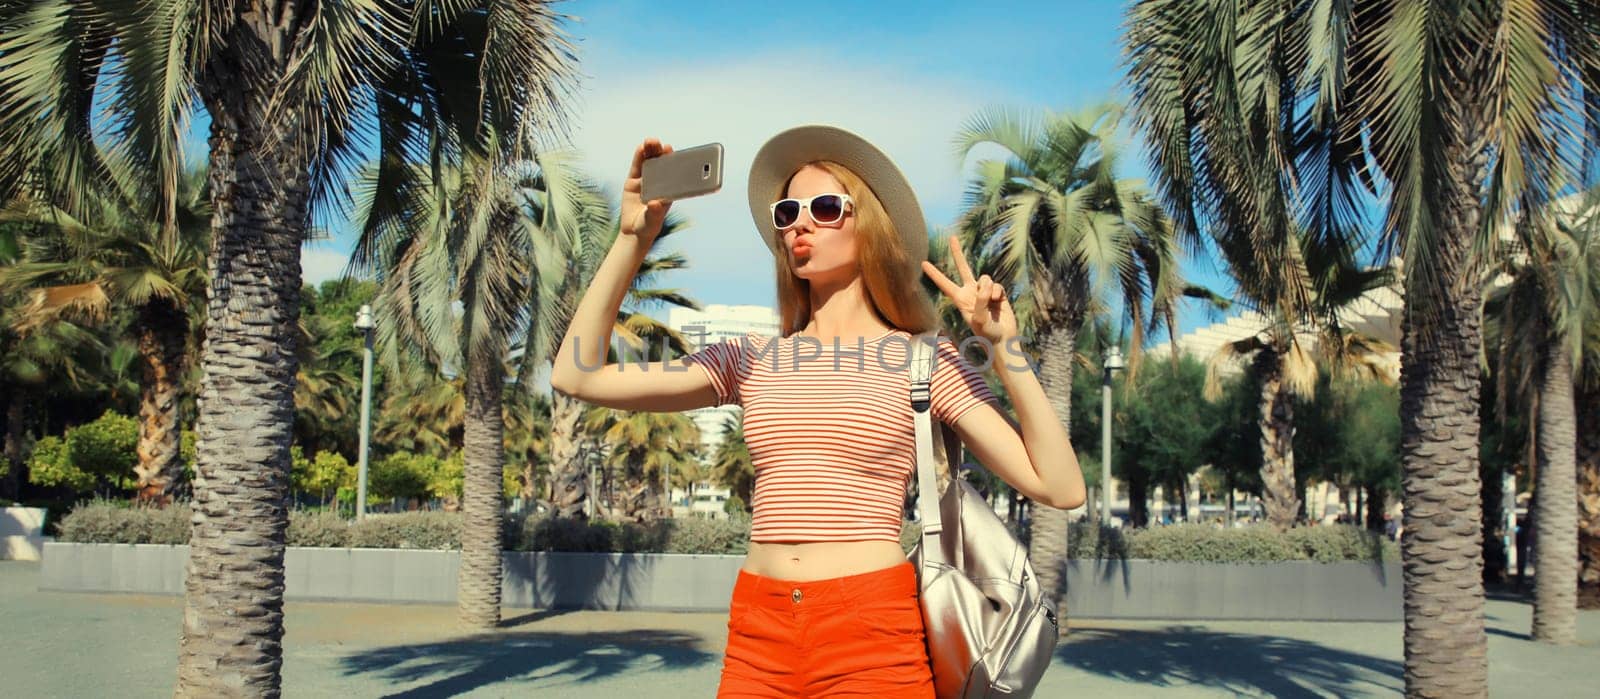 Portrait of young woman taking selfie with phone in summer park against a palm trees background by Rohappy